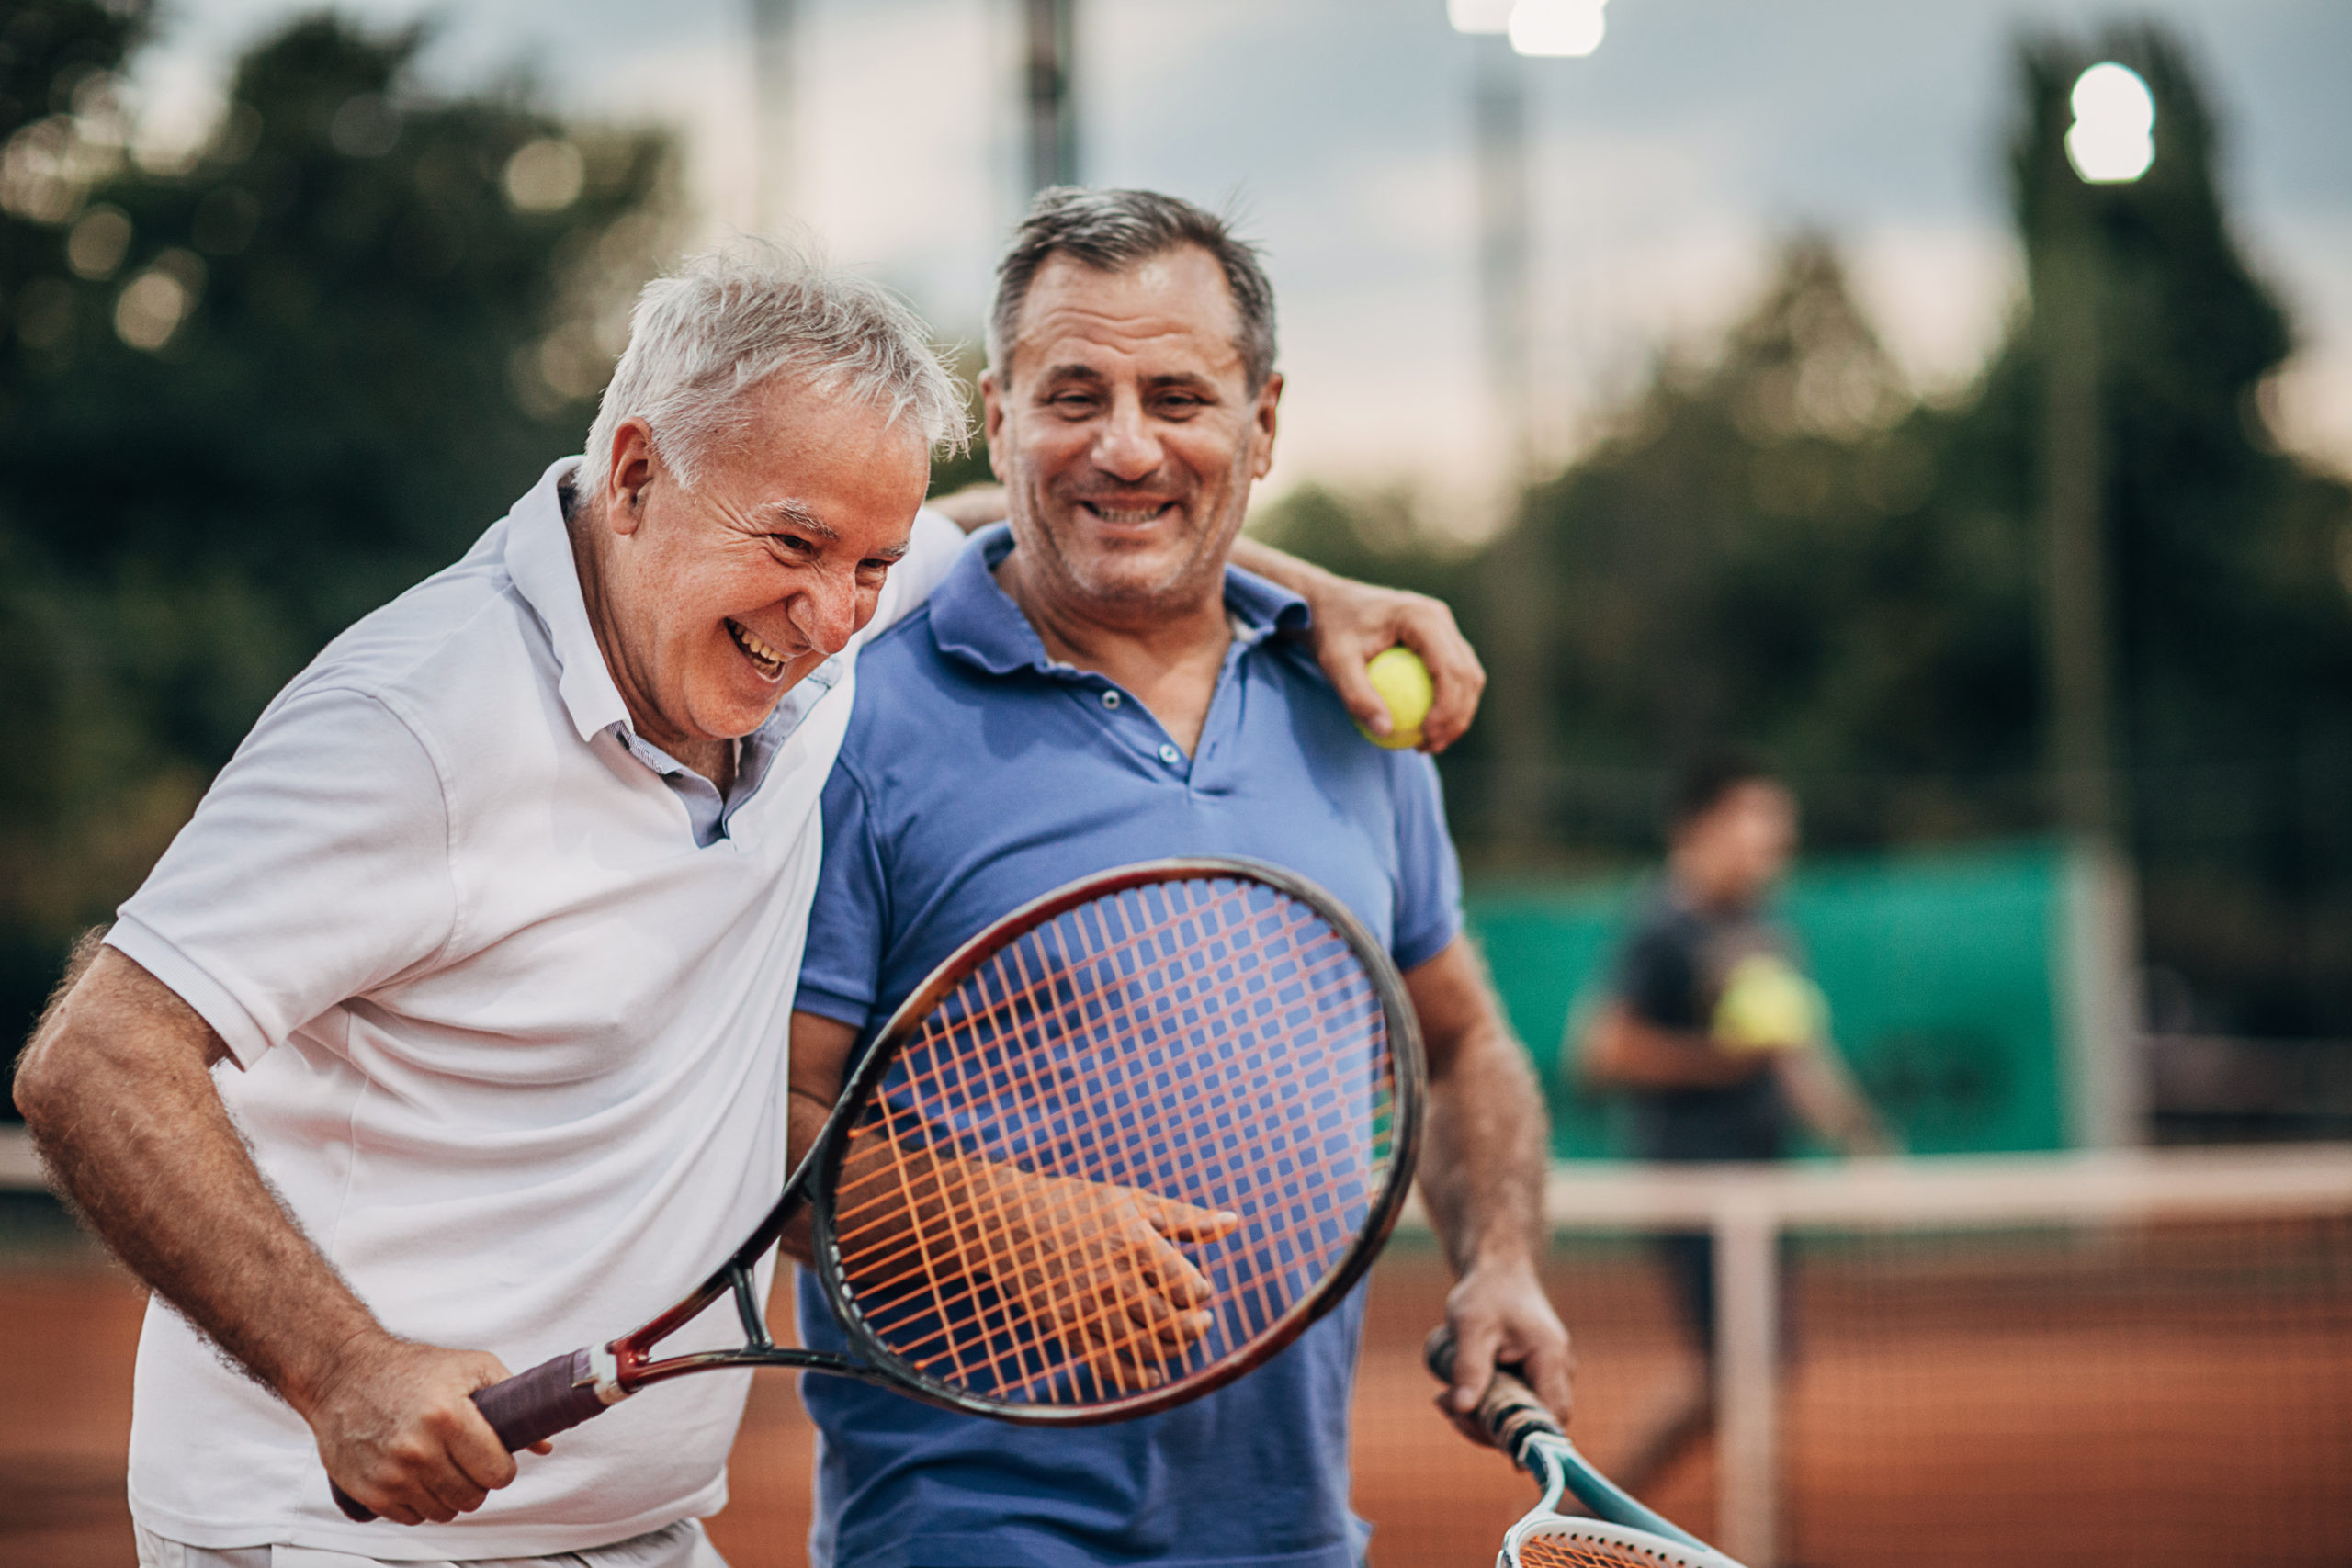 Two cheerful senior men talking while walking on the outdoor tennis court